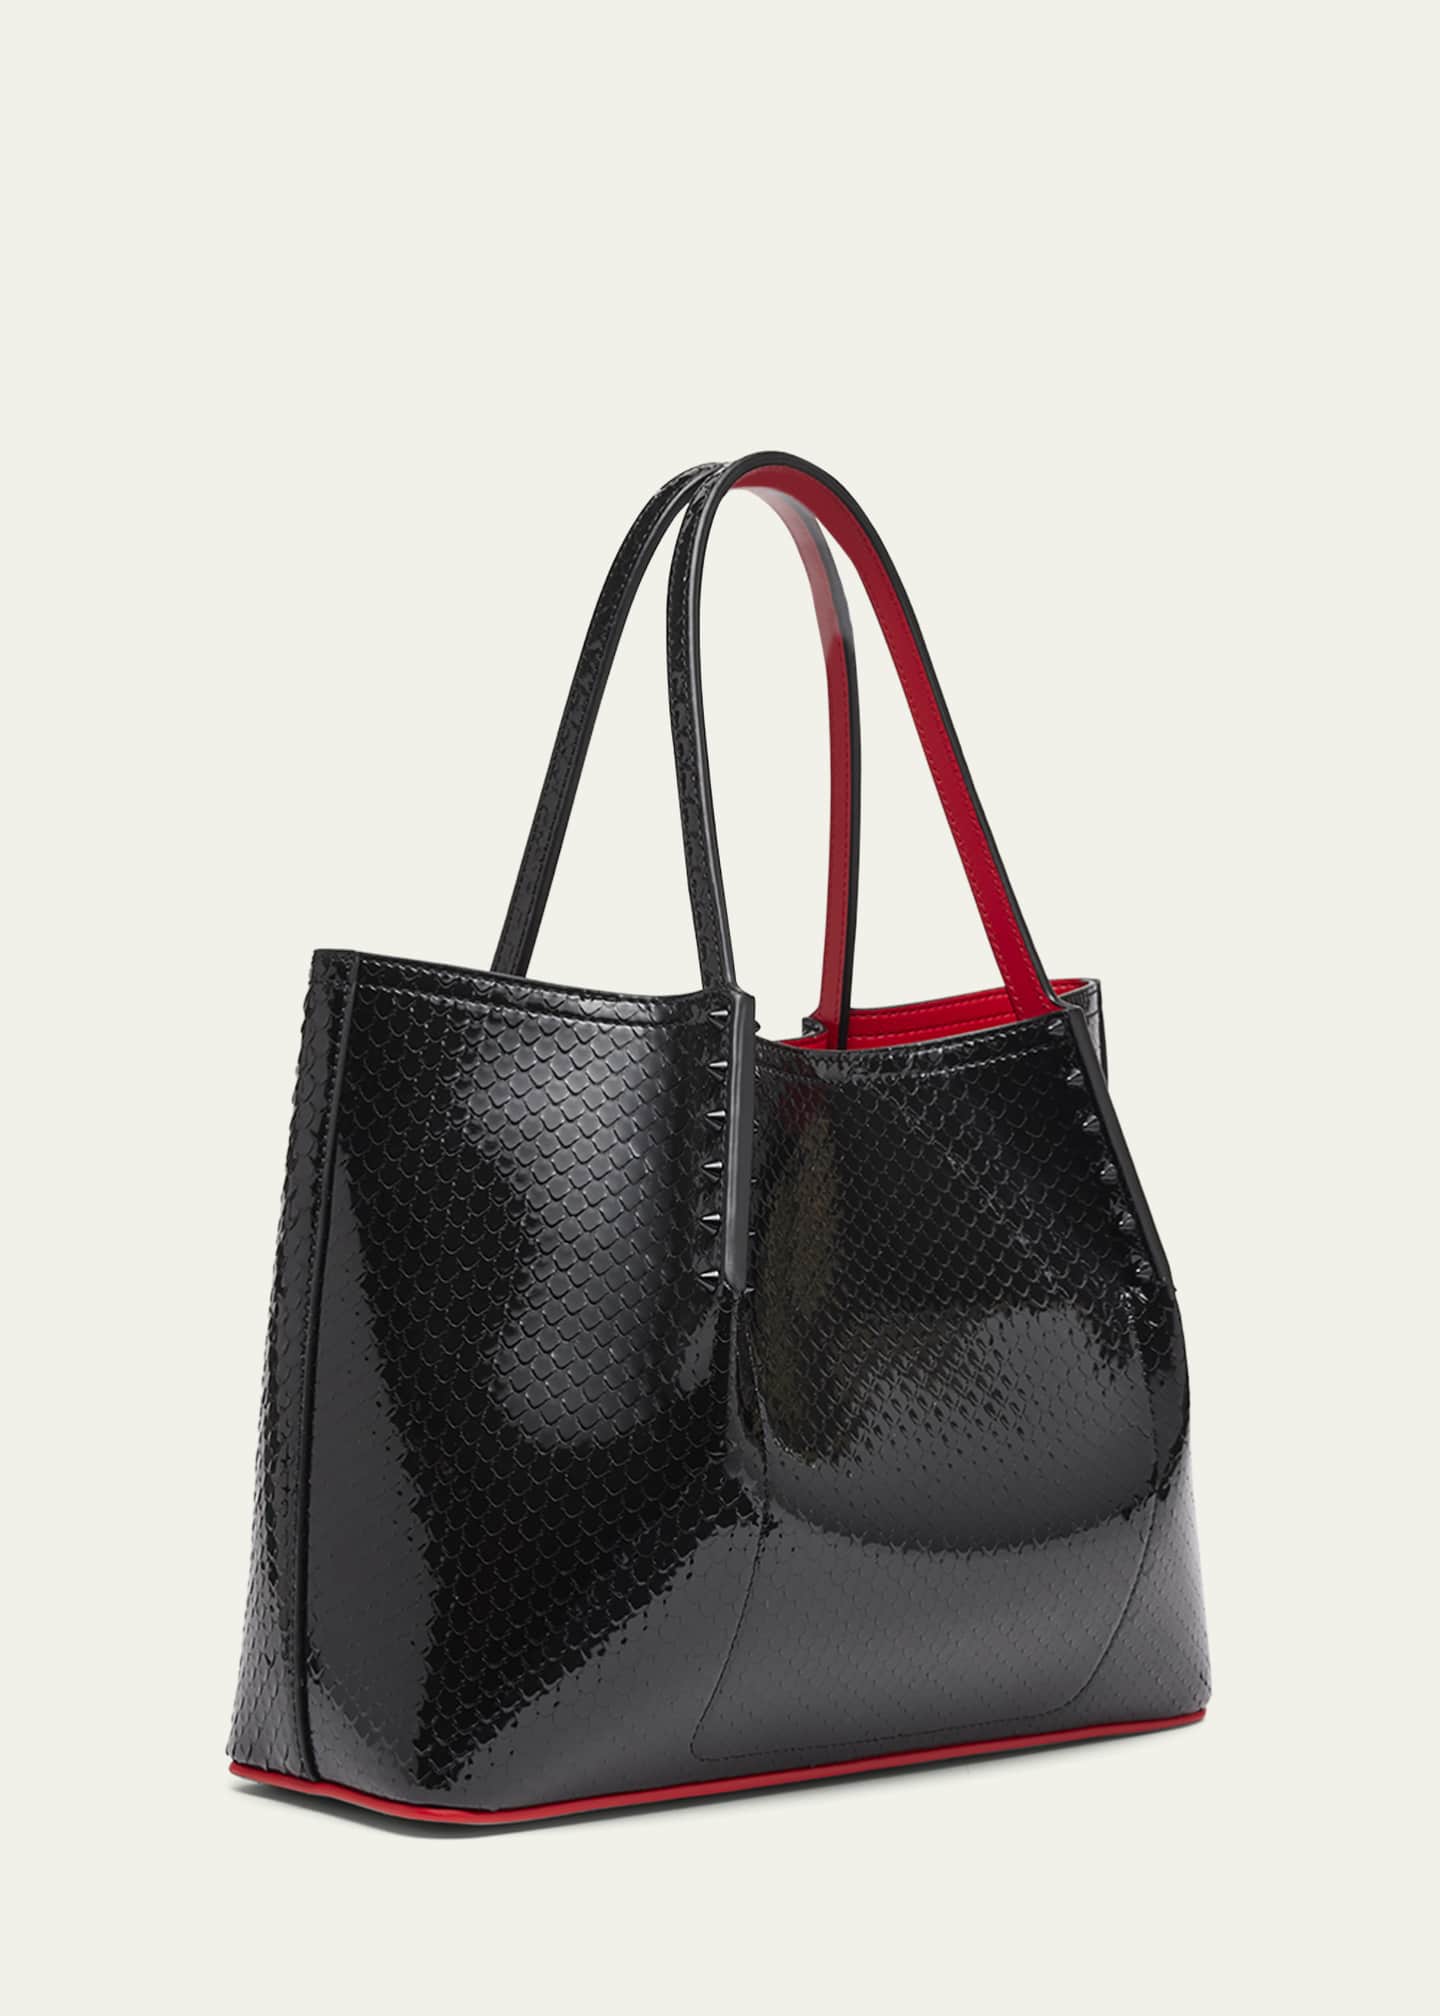 Christian Louboutin Large Cabarock Embossed Patent Leather Tote